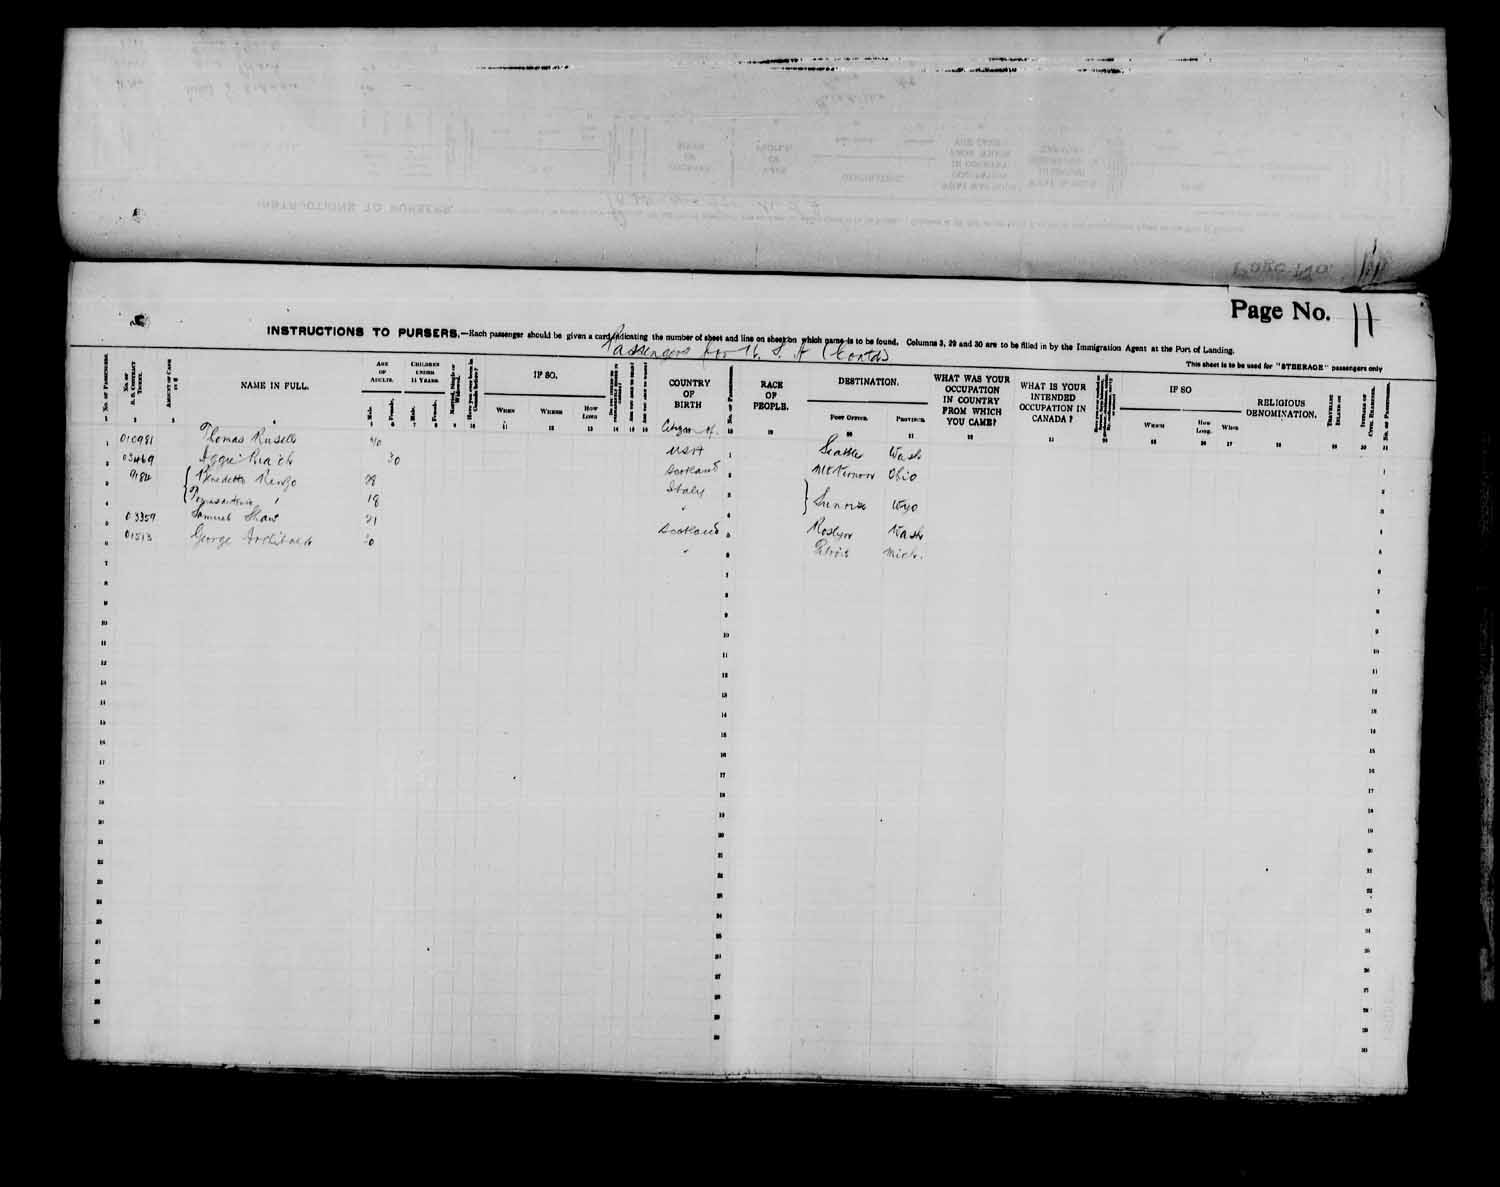 Digitized page of Passenger Lists for Image No.: e003566530